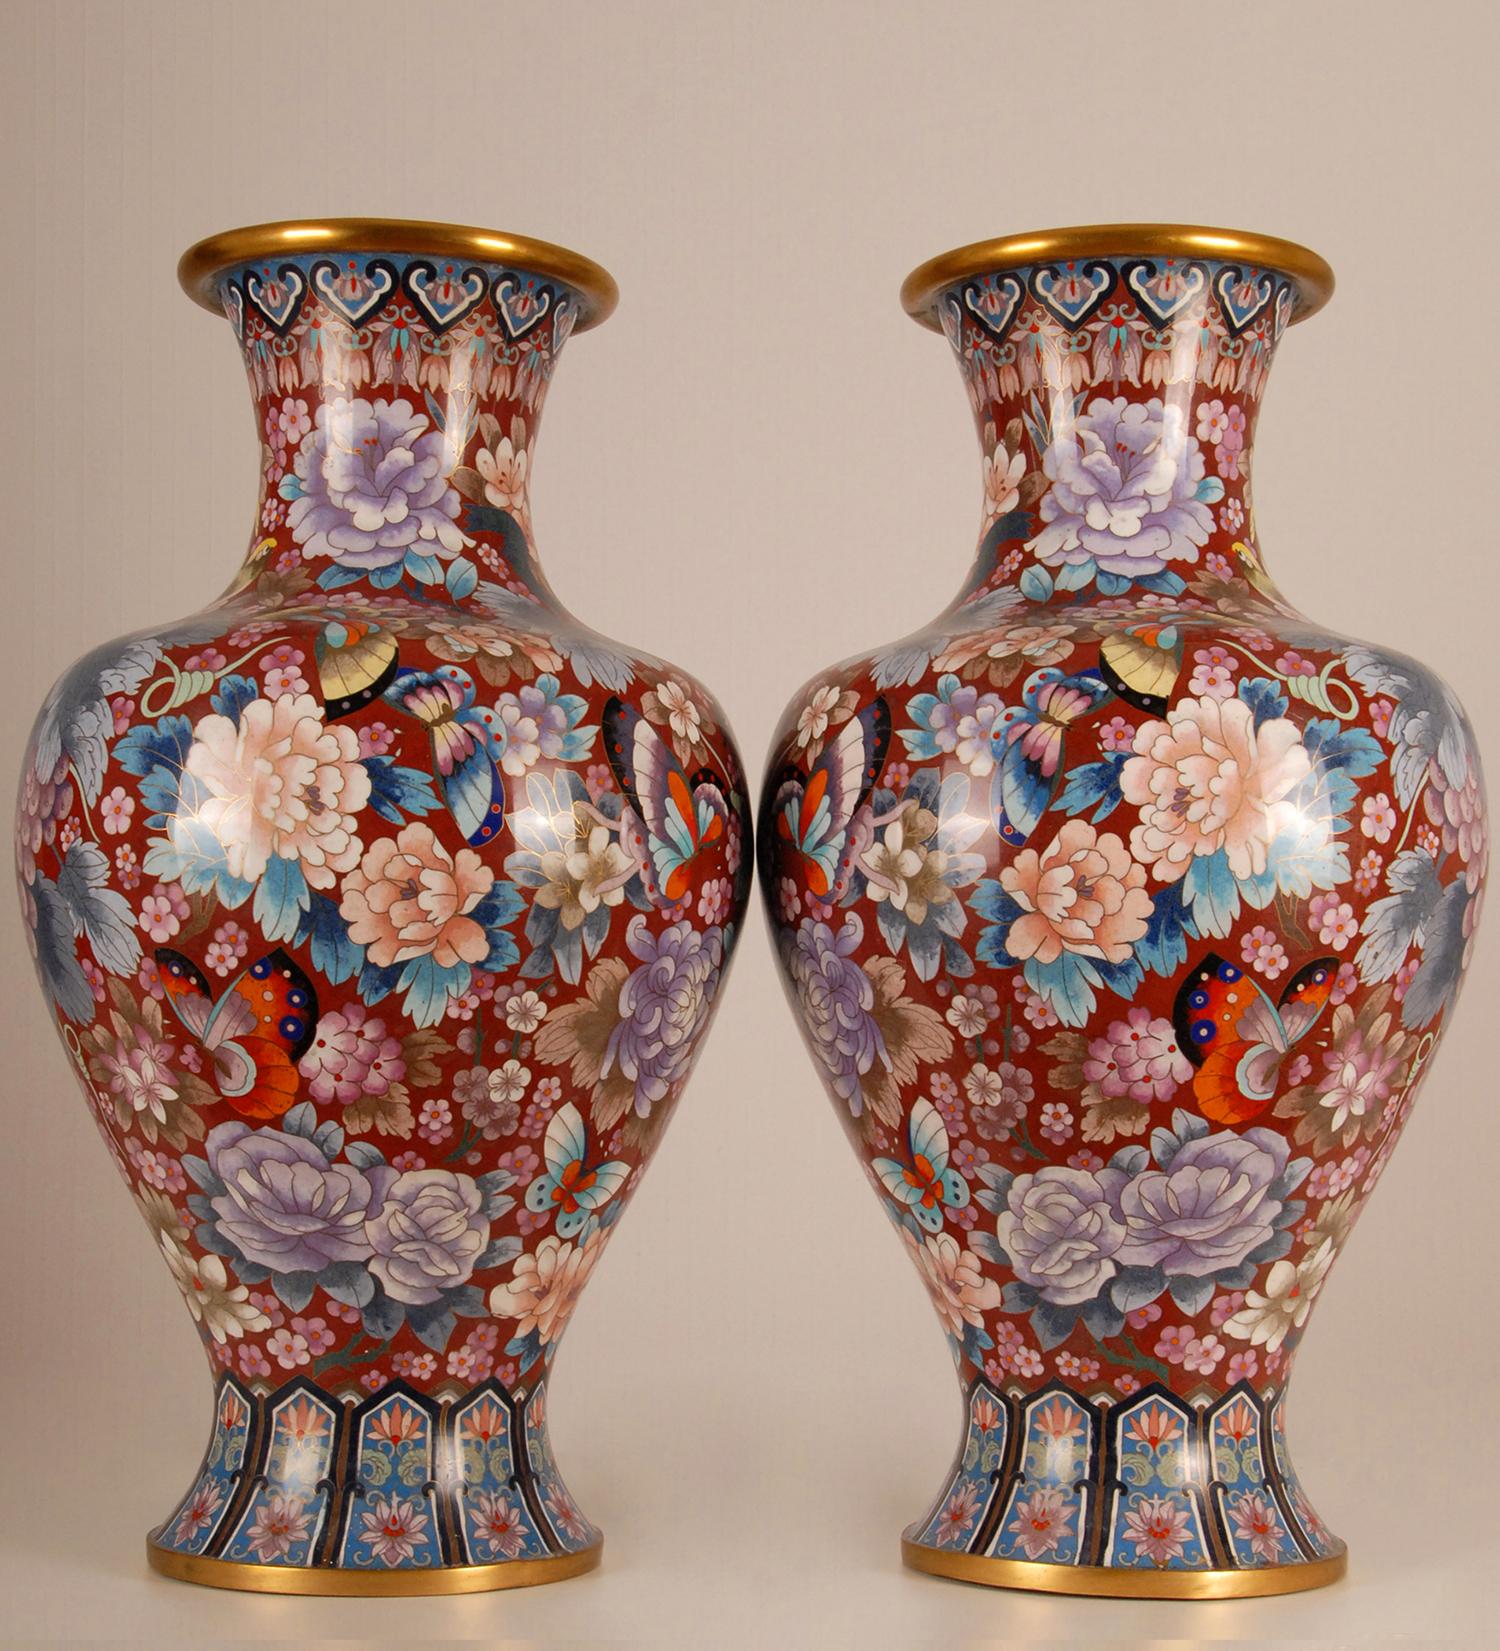 20th Century Chinese Cloisonne Gilded Bronze Baluster Vases Enameled Republic Vases a Pair